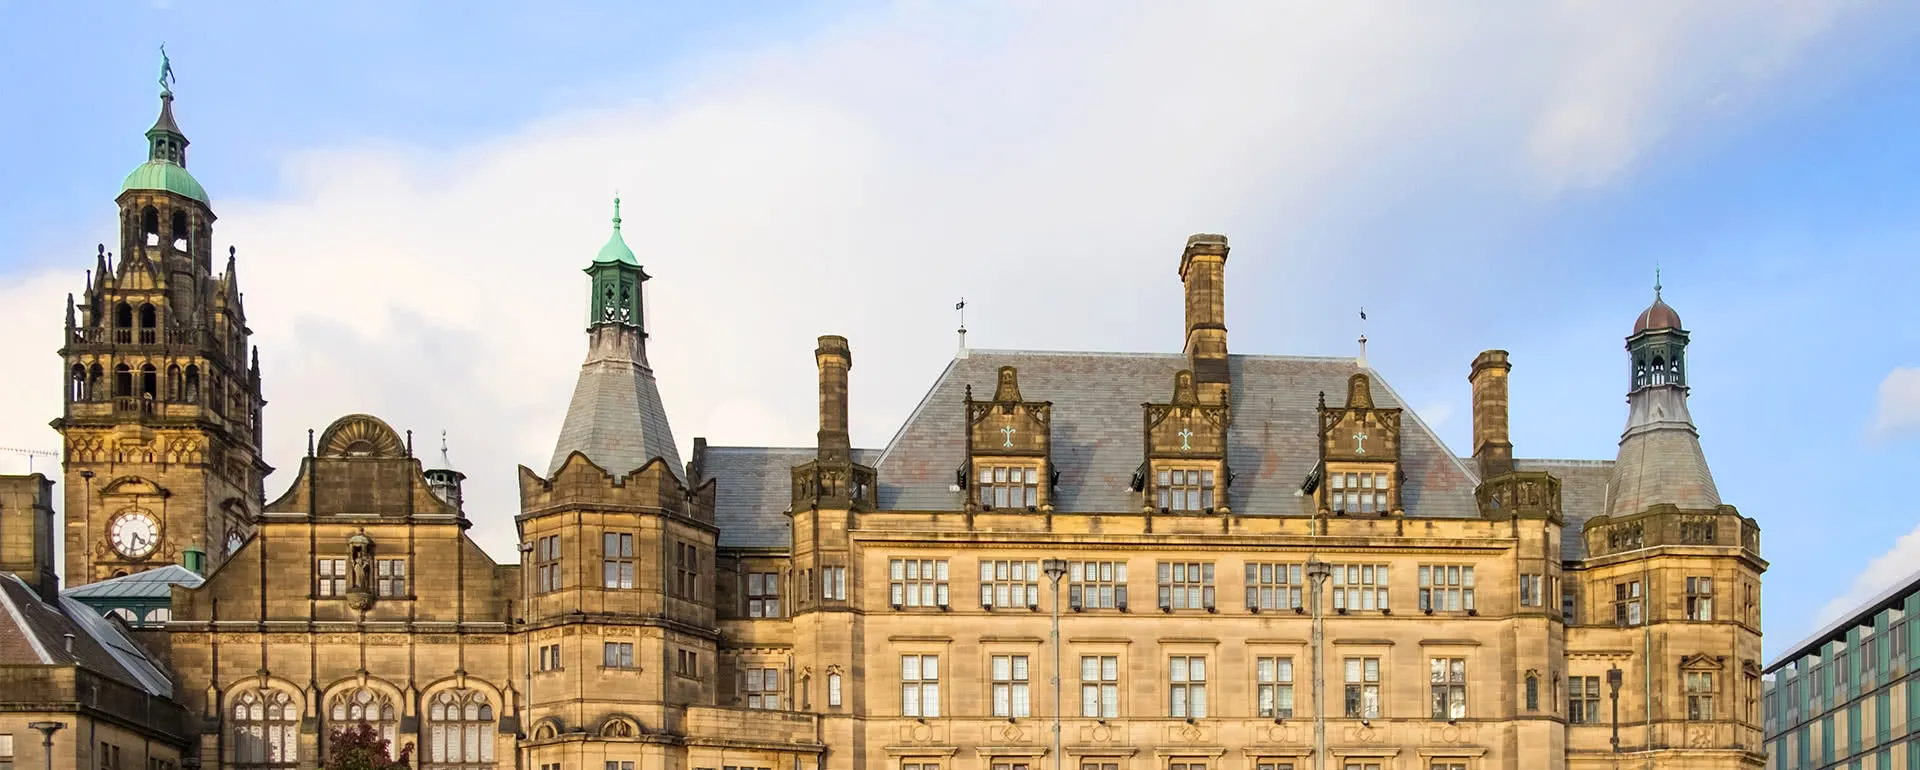 Sheffield - the destination with youth hostels